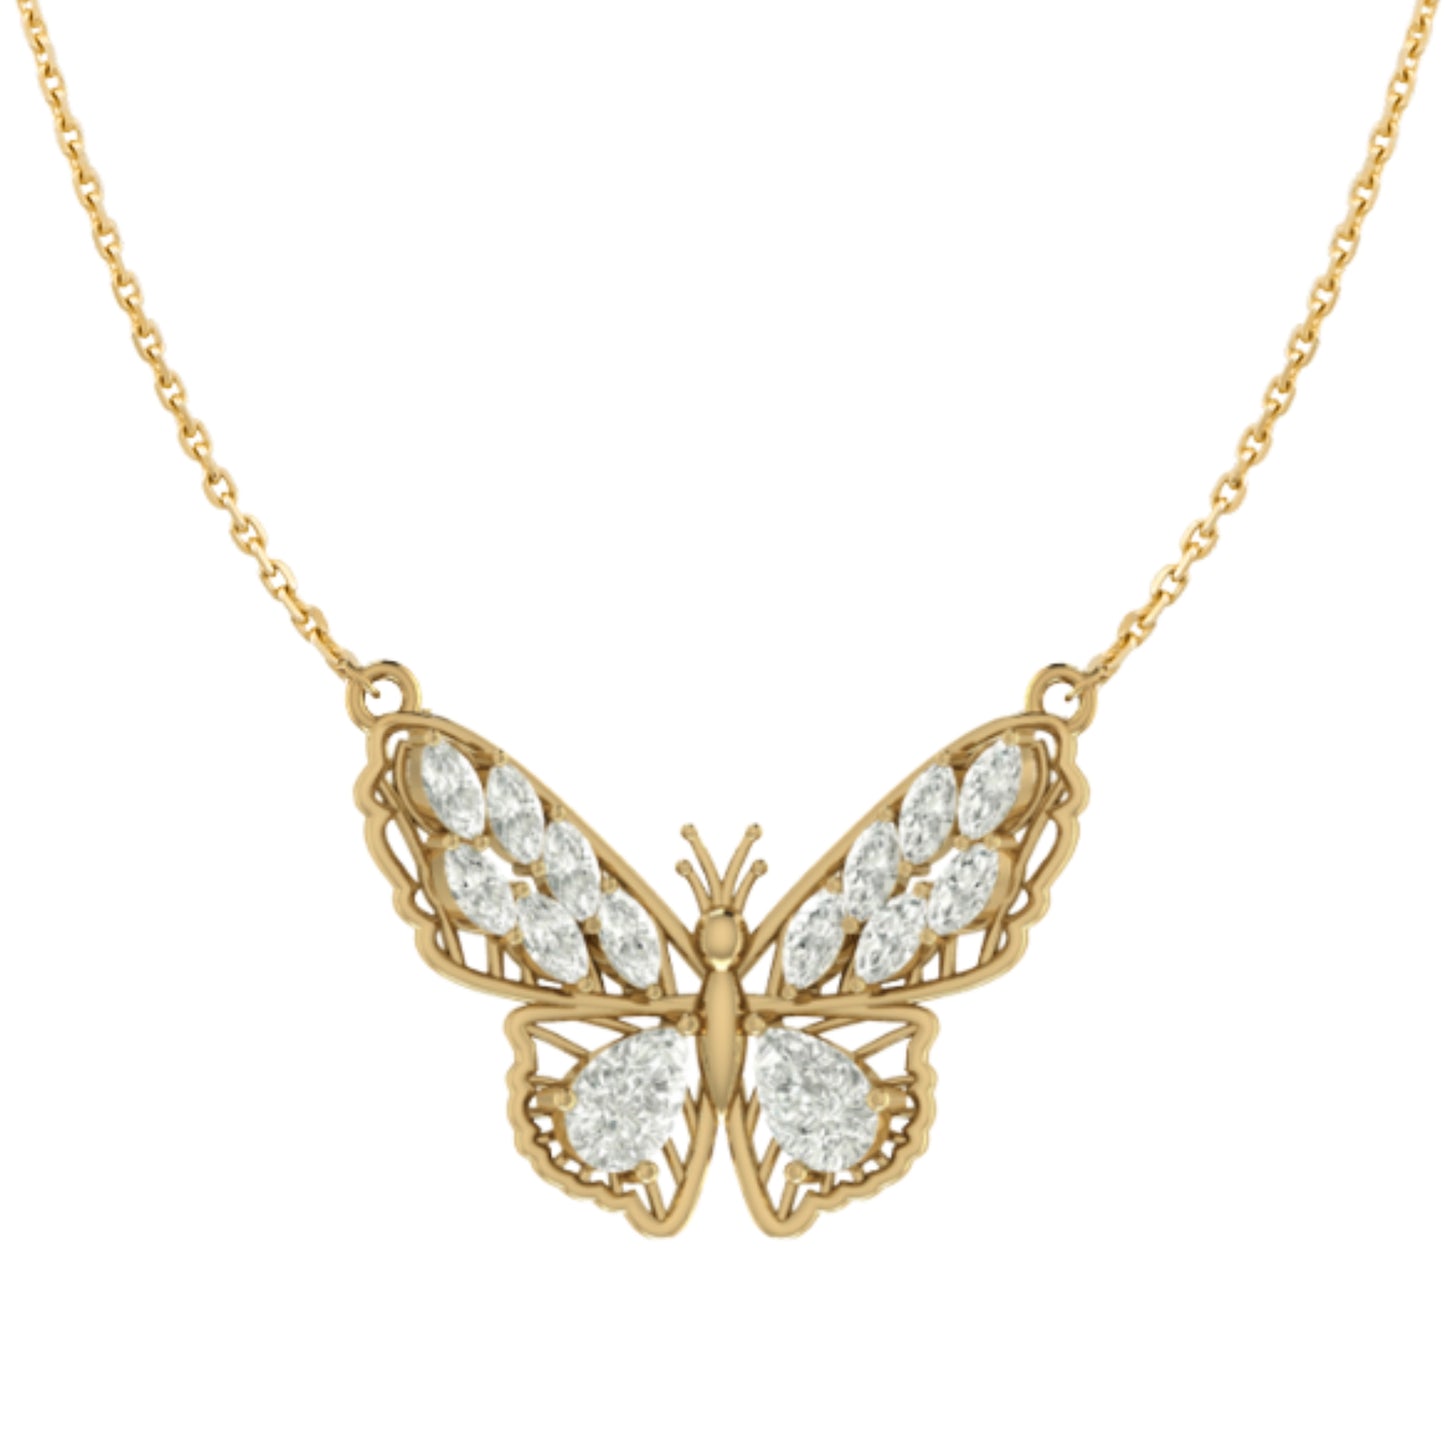 Flickering Lit Butterfly Necklace